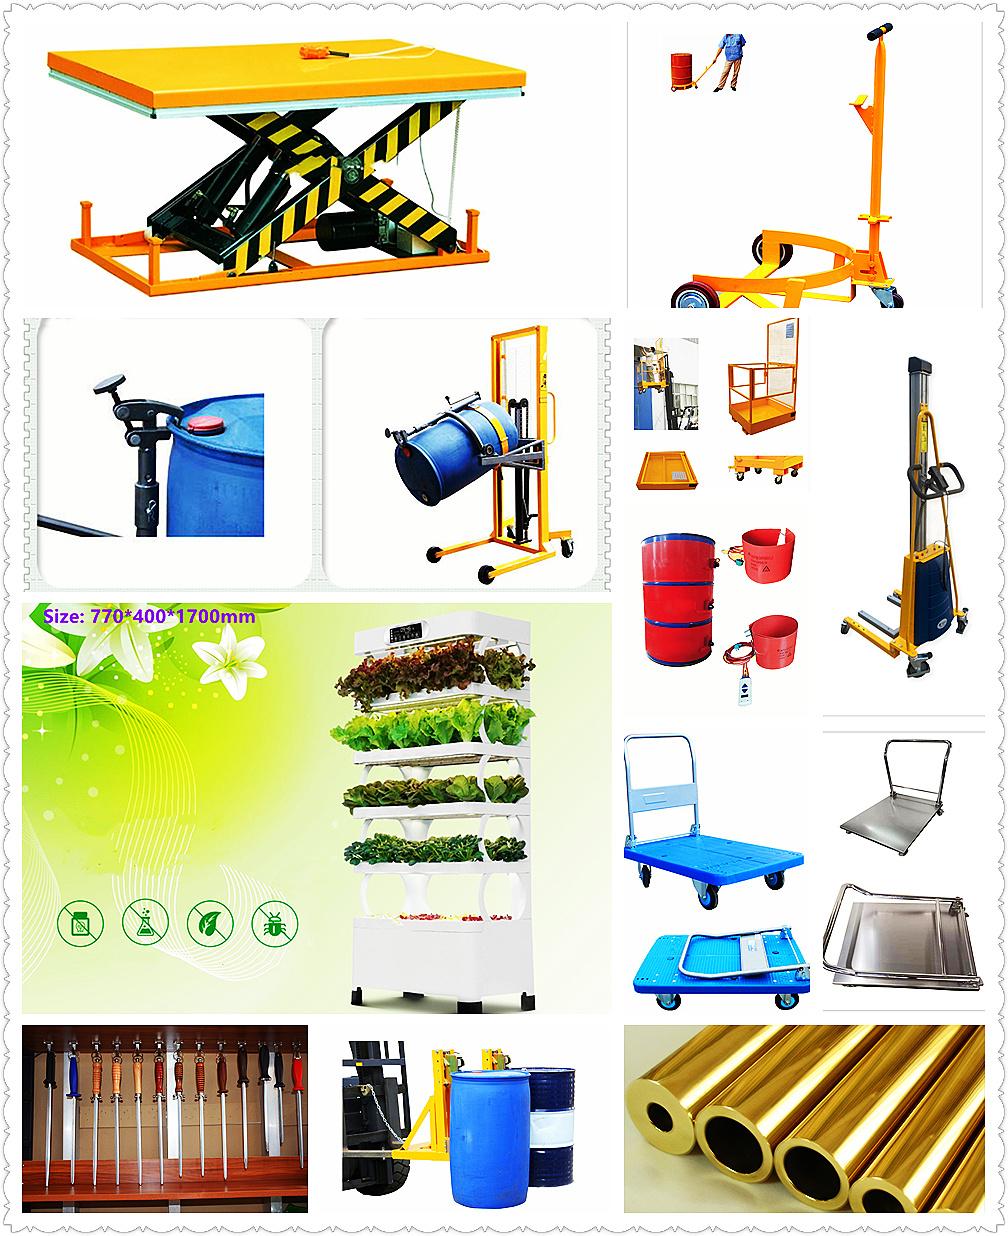 China Factory Price Stationary Electric Scissor Lift Table 1000-4000kg